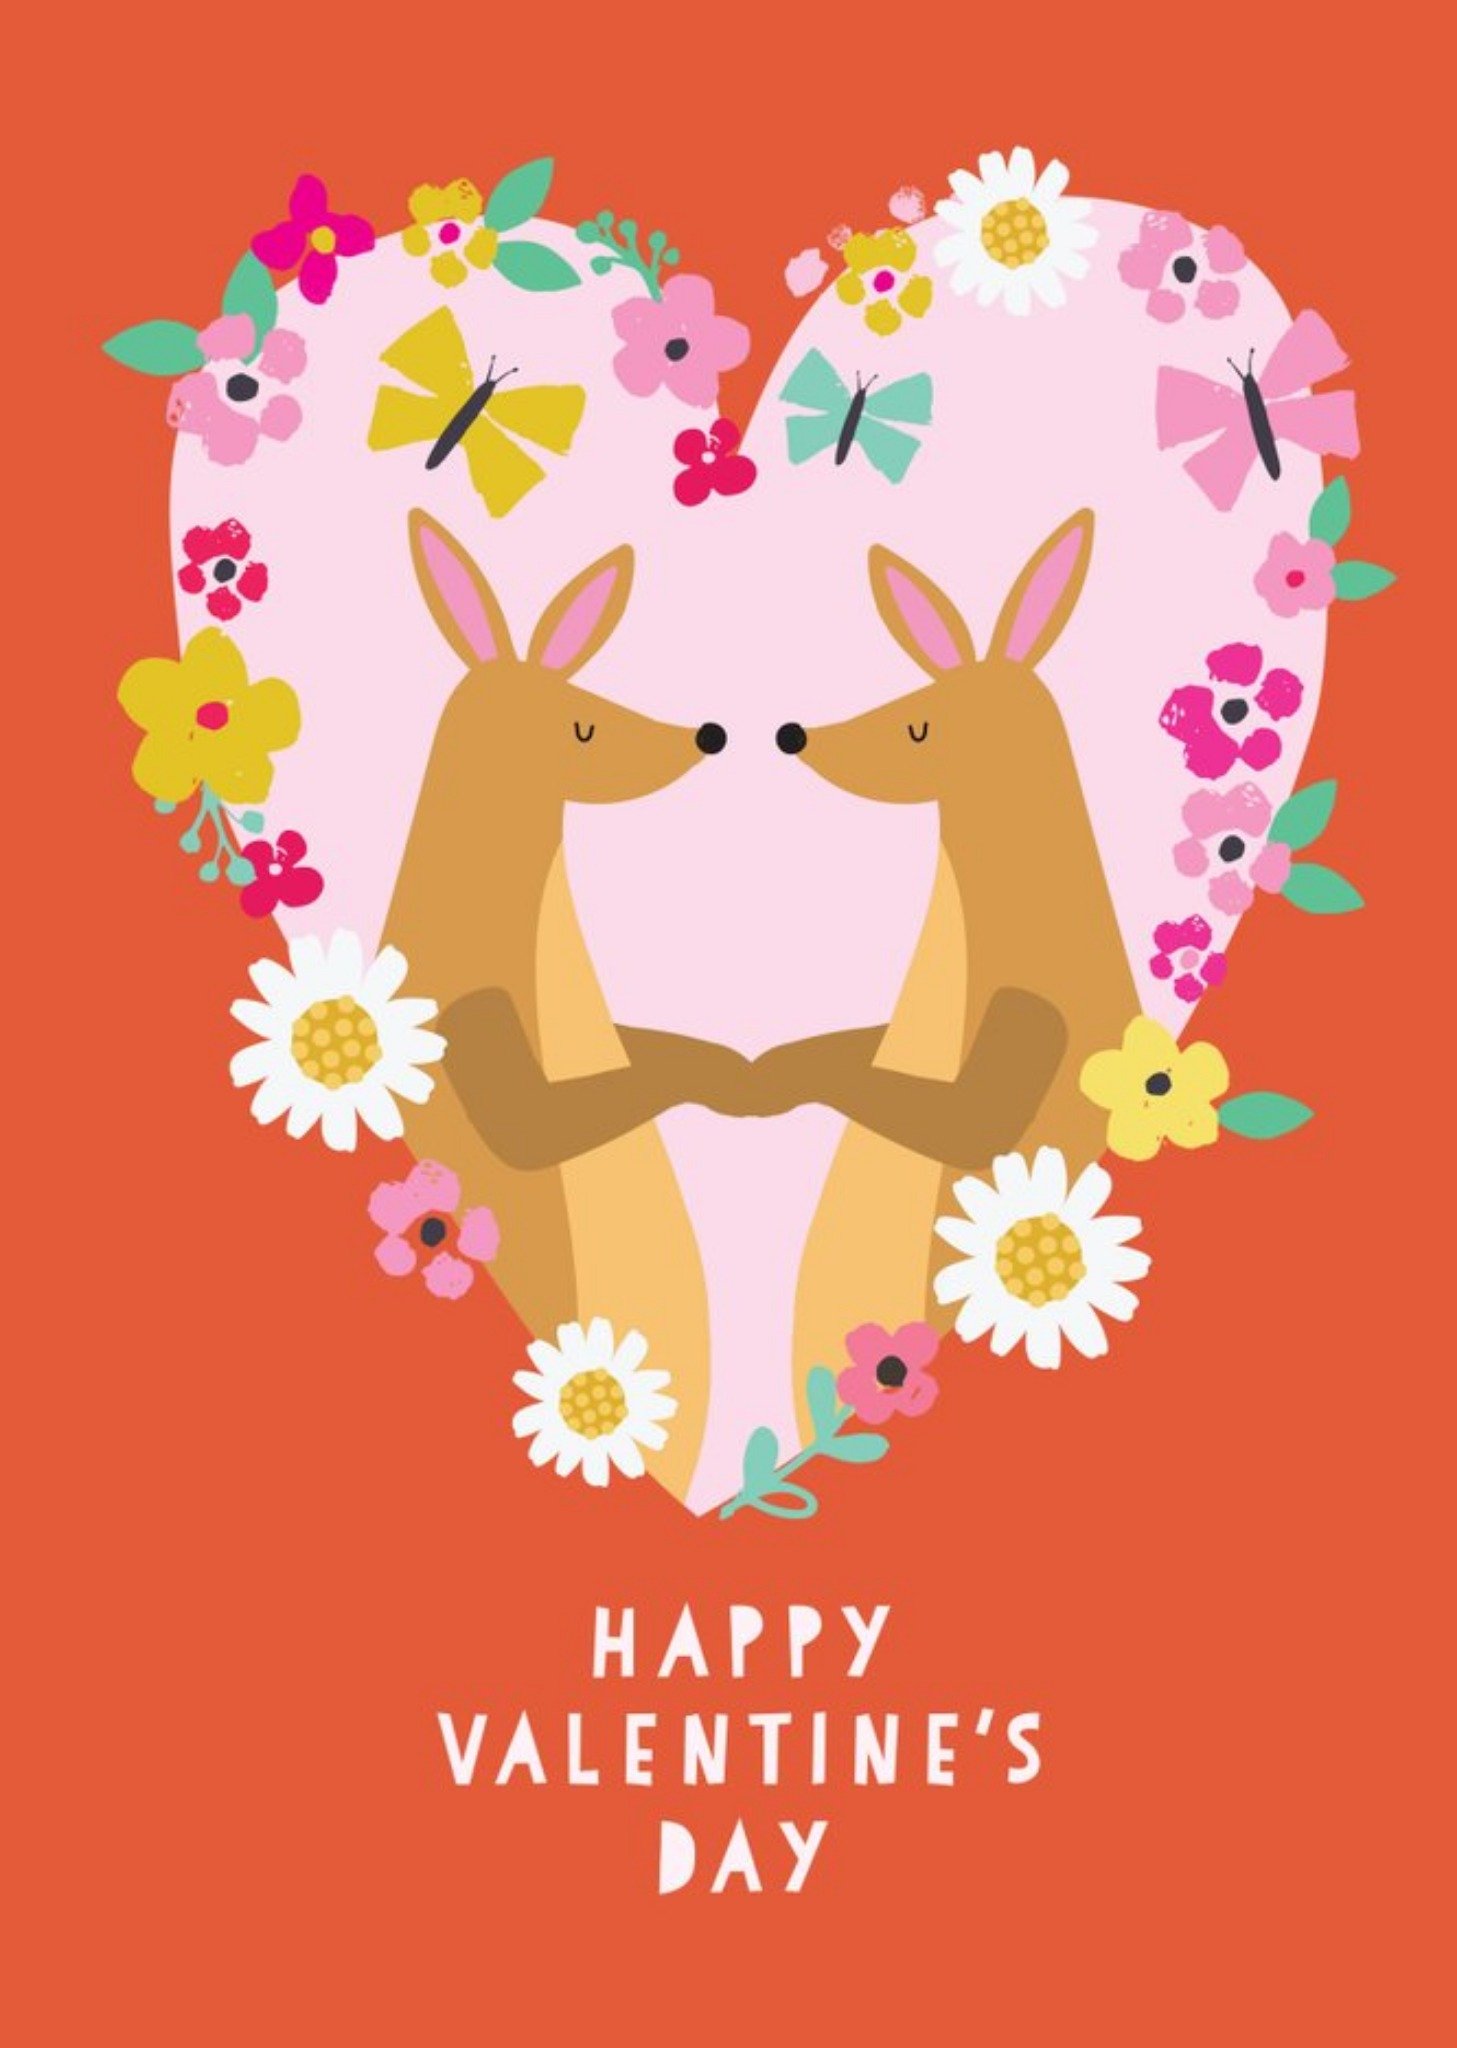 Moonpig Bright Colourful Illustration Of Two Kangaroos In A Loveheart Happy Valentine's Day Card, La